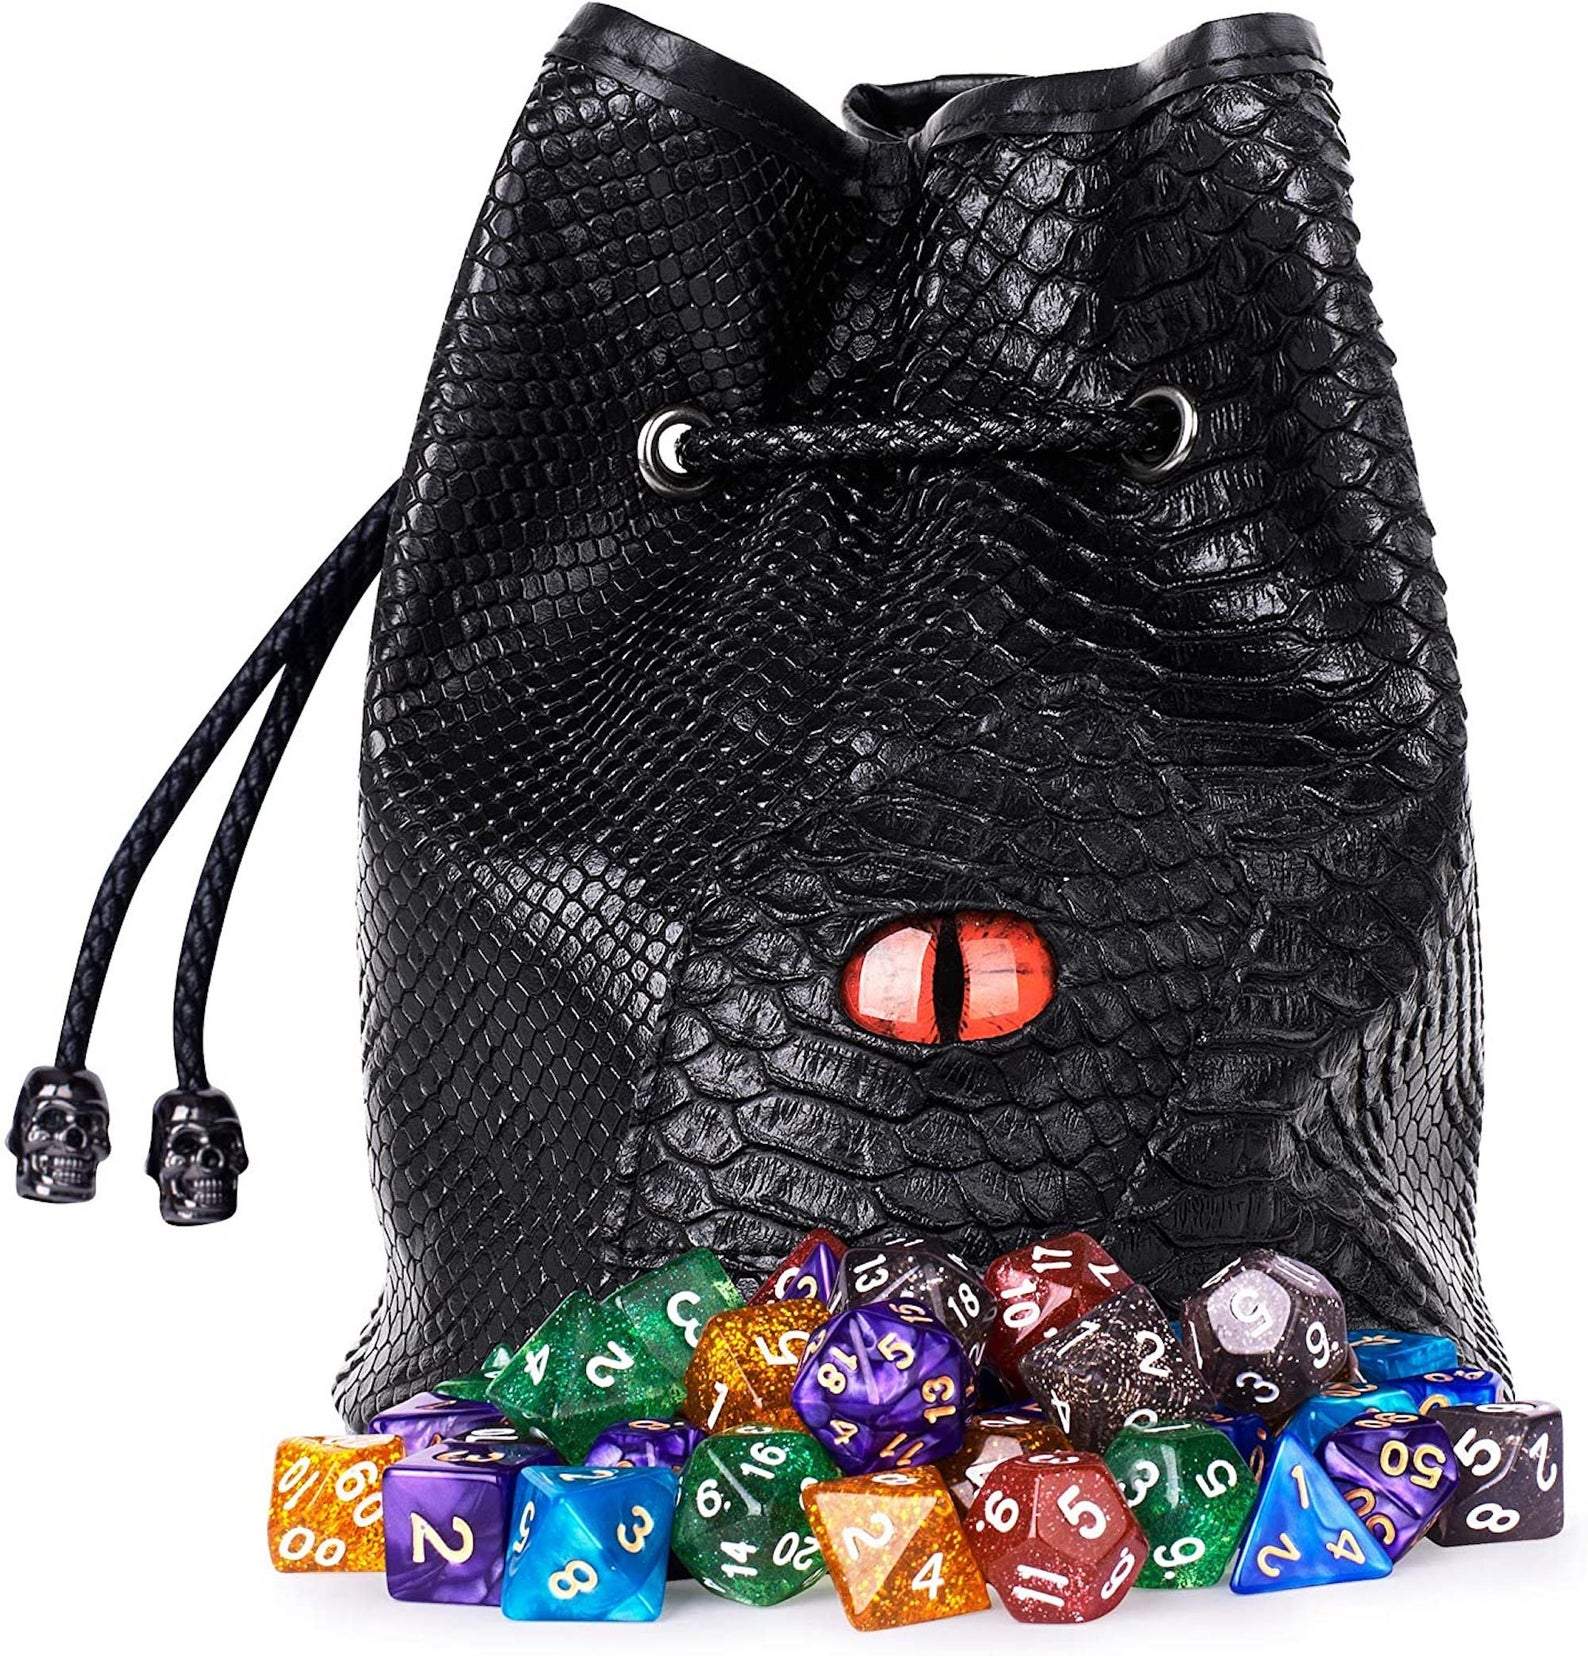 ENHANCE DnD Bag: Dungeon Master Travel Bag with Miniature Storage - YouTube